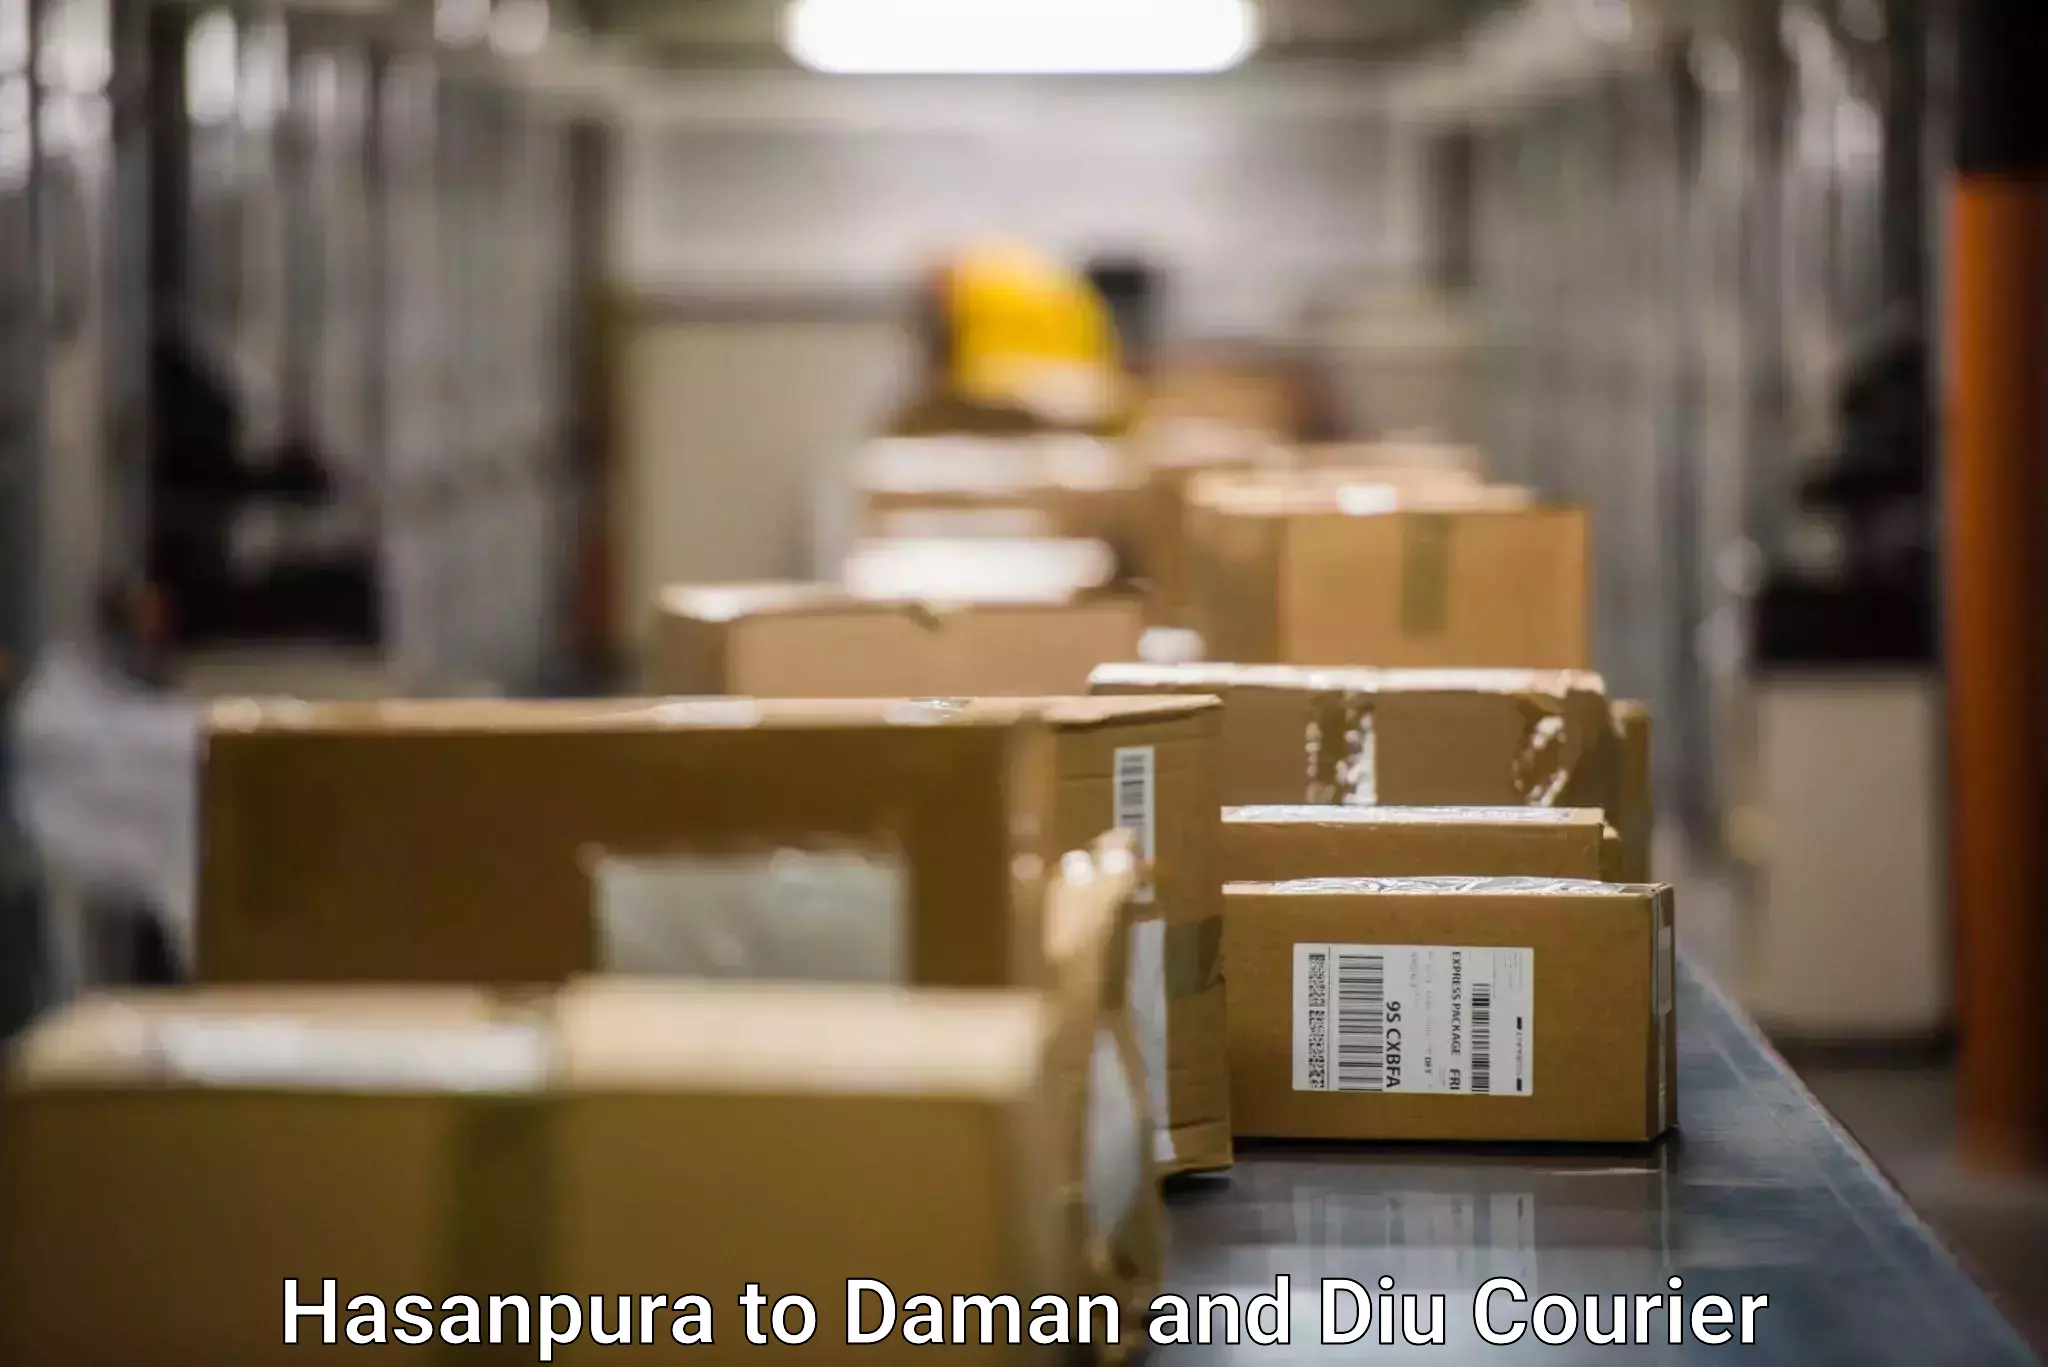 Courier service efficiency Hasanpura to Diu